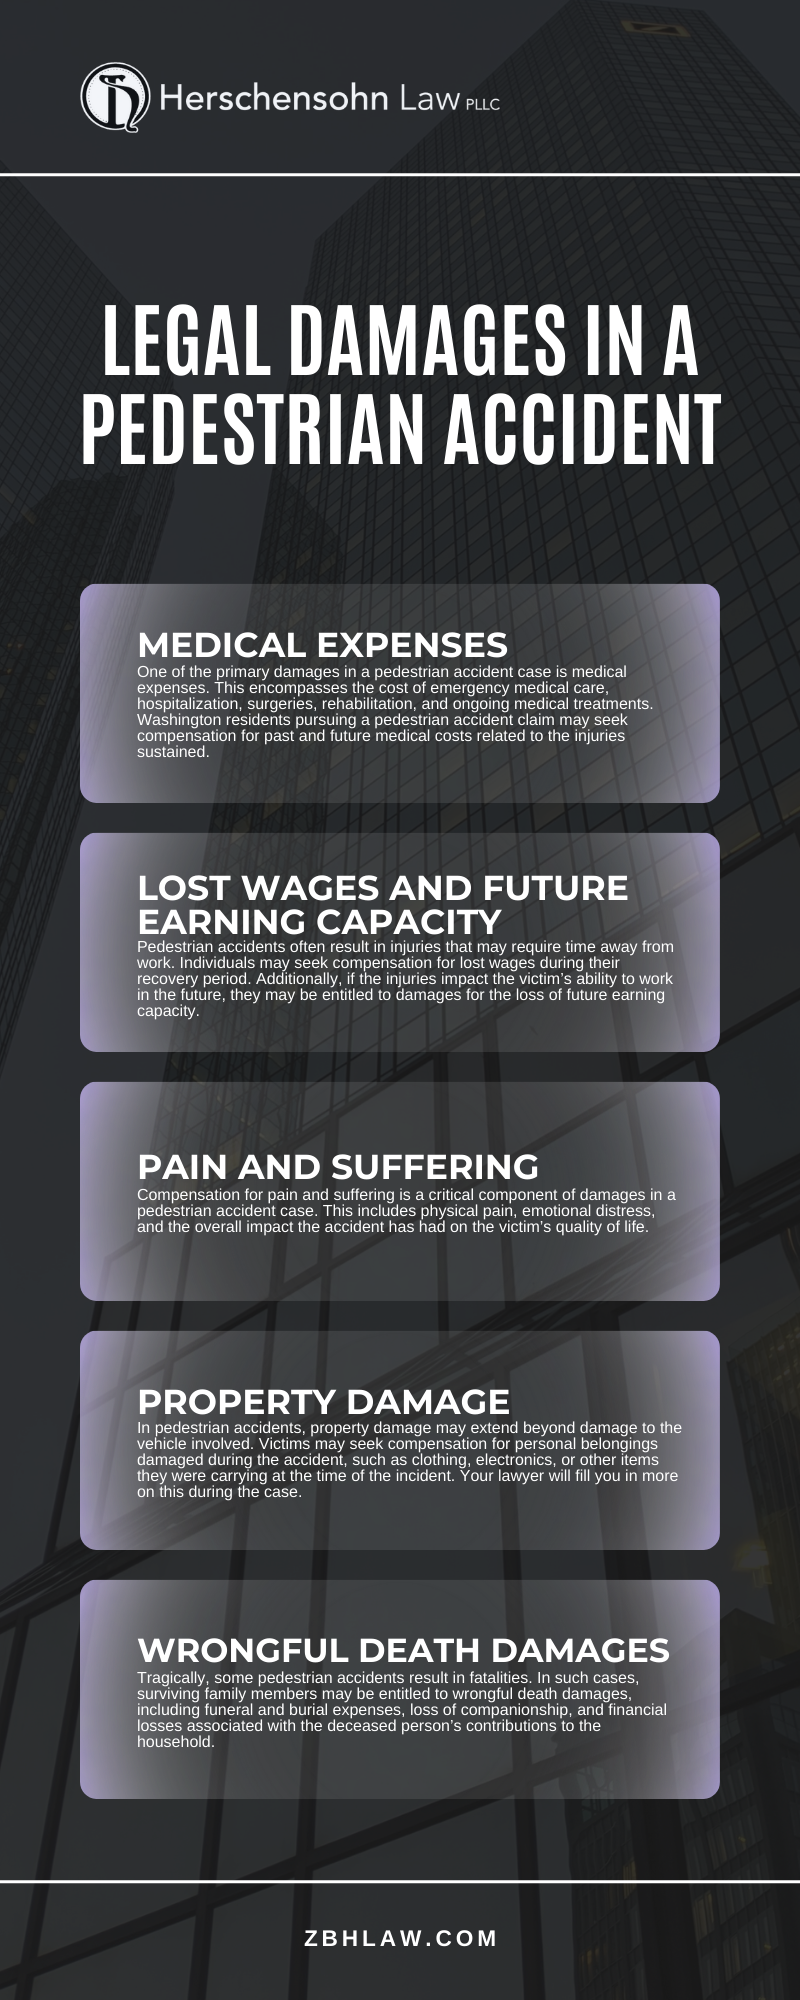 Legal Damages In A Pedestrian Accident Infographic